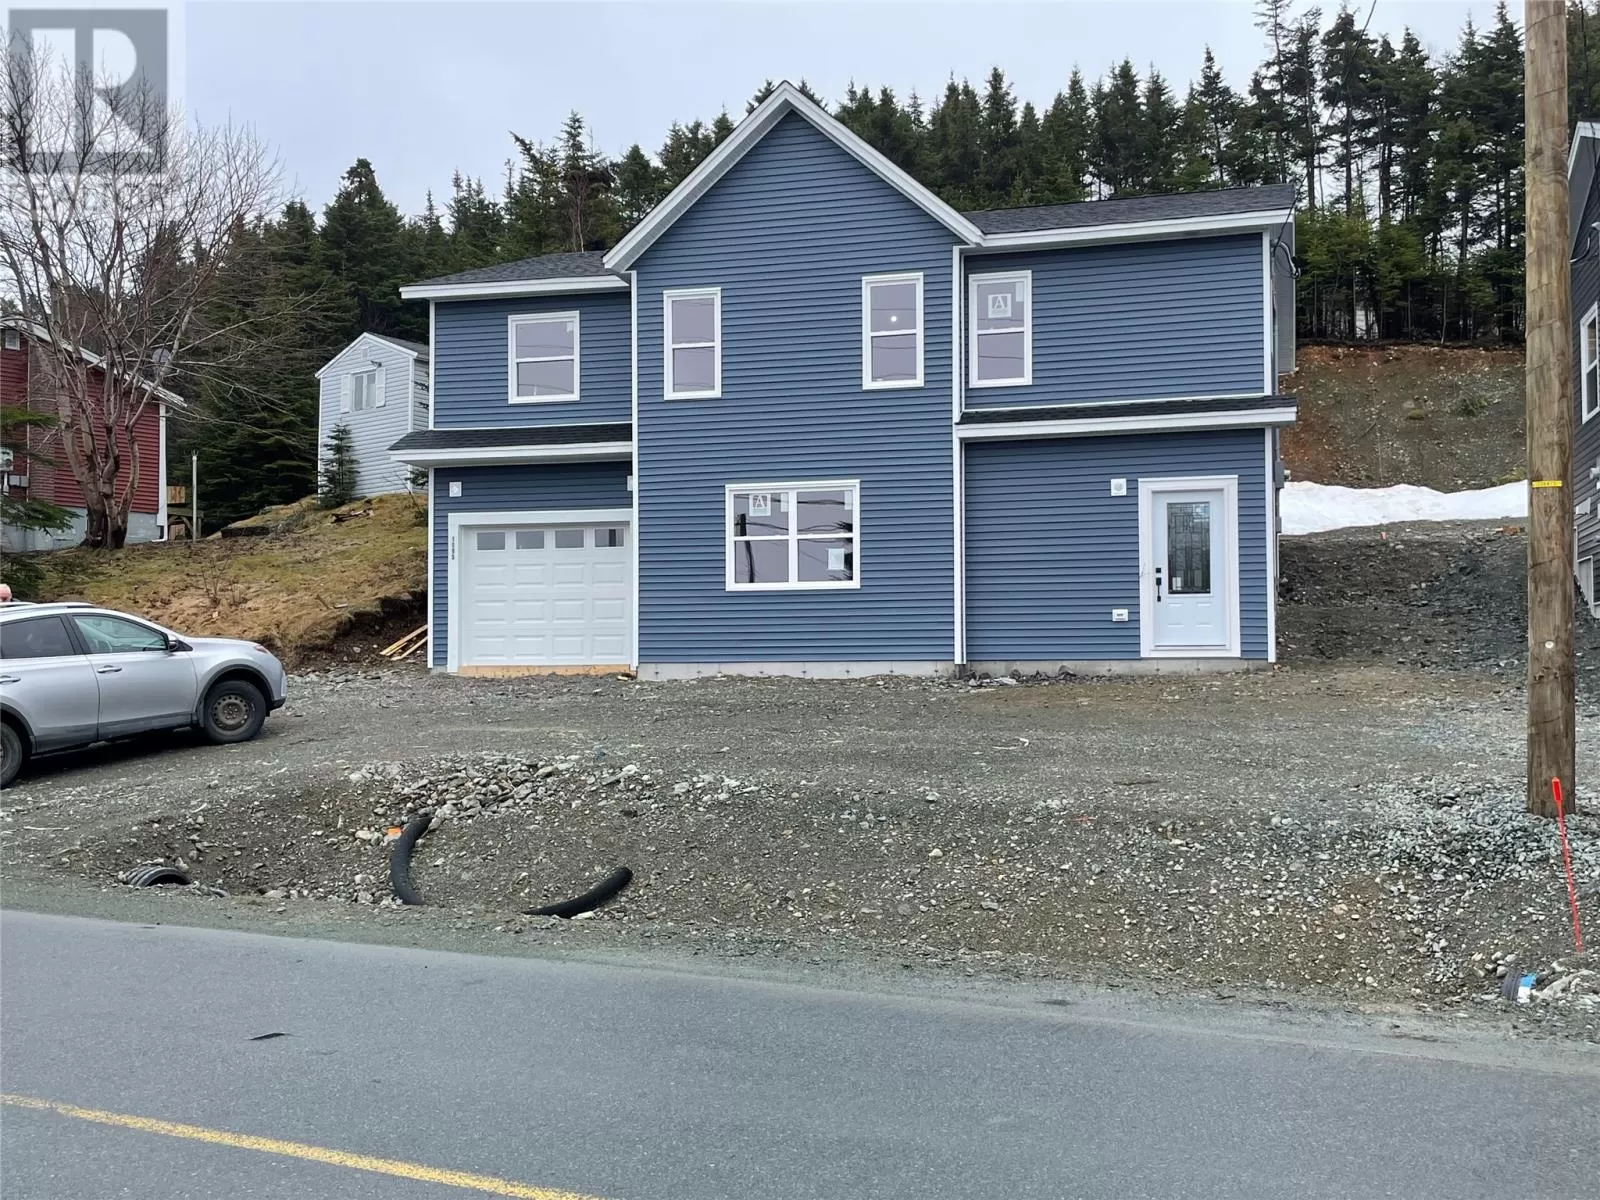 House for rent: 1095 Indian Meal Line, Portugal Cove - St. Phillips, Newfoundland & Labrador A1M 3C4